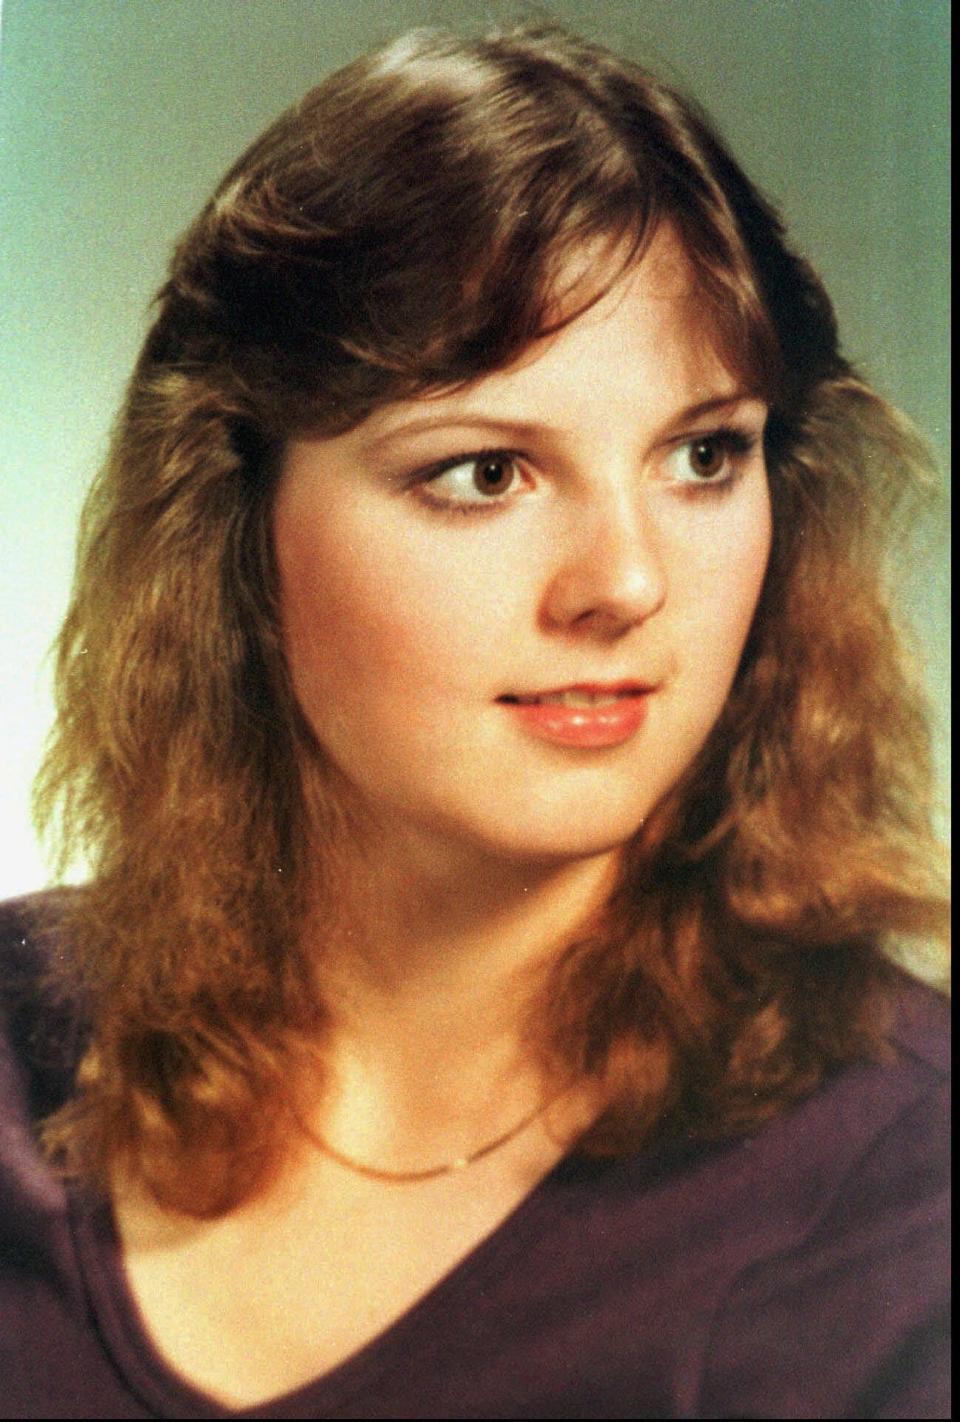 Copy photo of Stephanie Kupchynsky who was missing for seven years. Her remains were found in Orleans County in 1998.